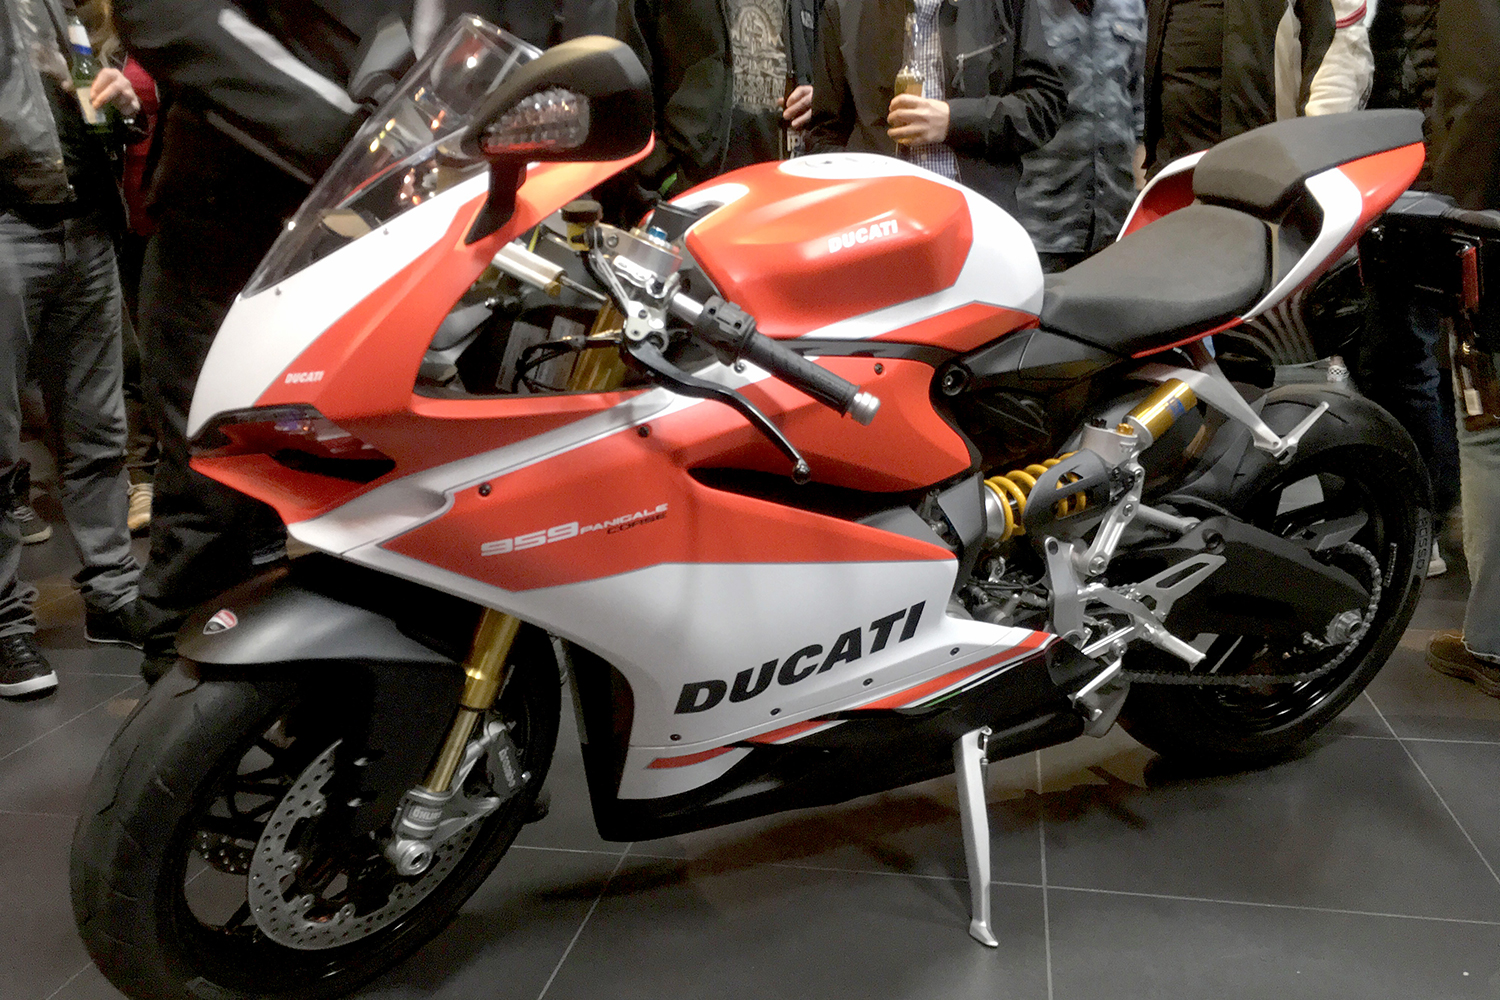 ducati 2018 motorcycle preview panigale 959 corse full3